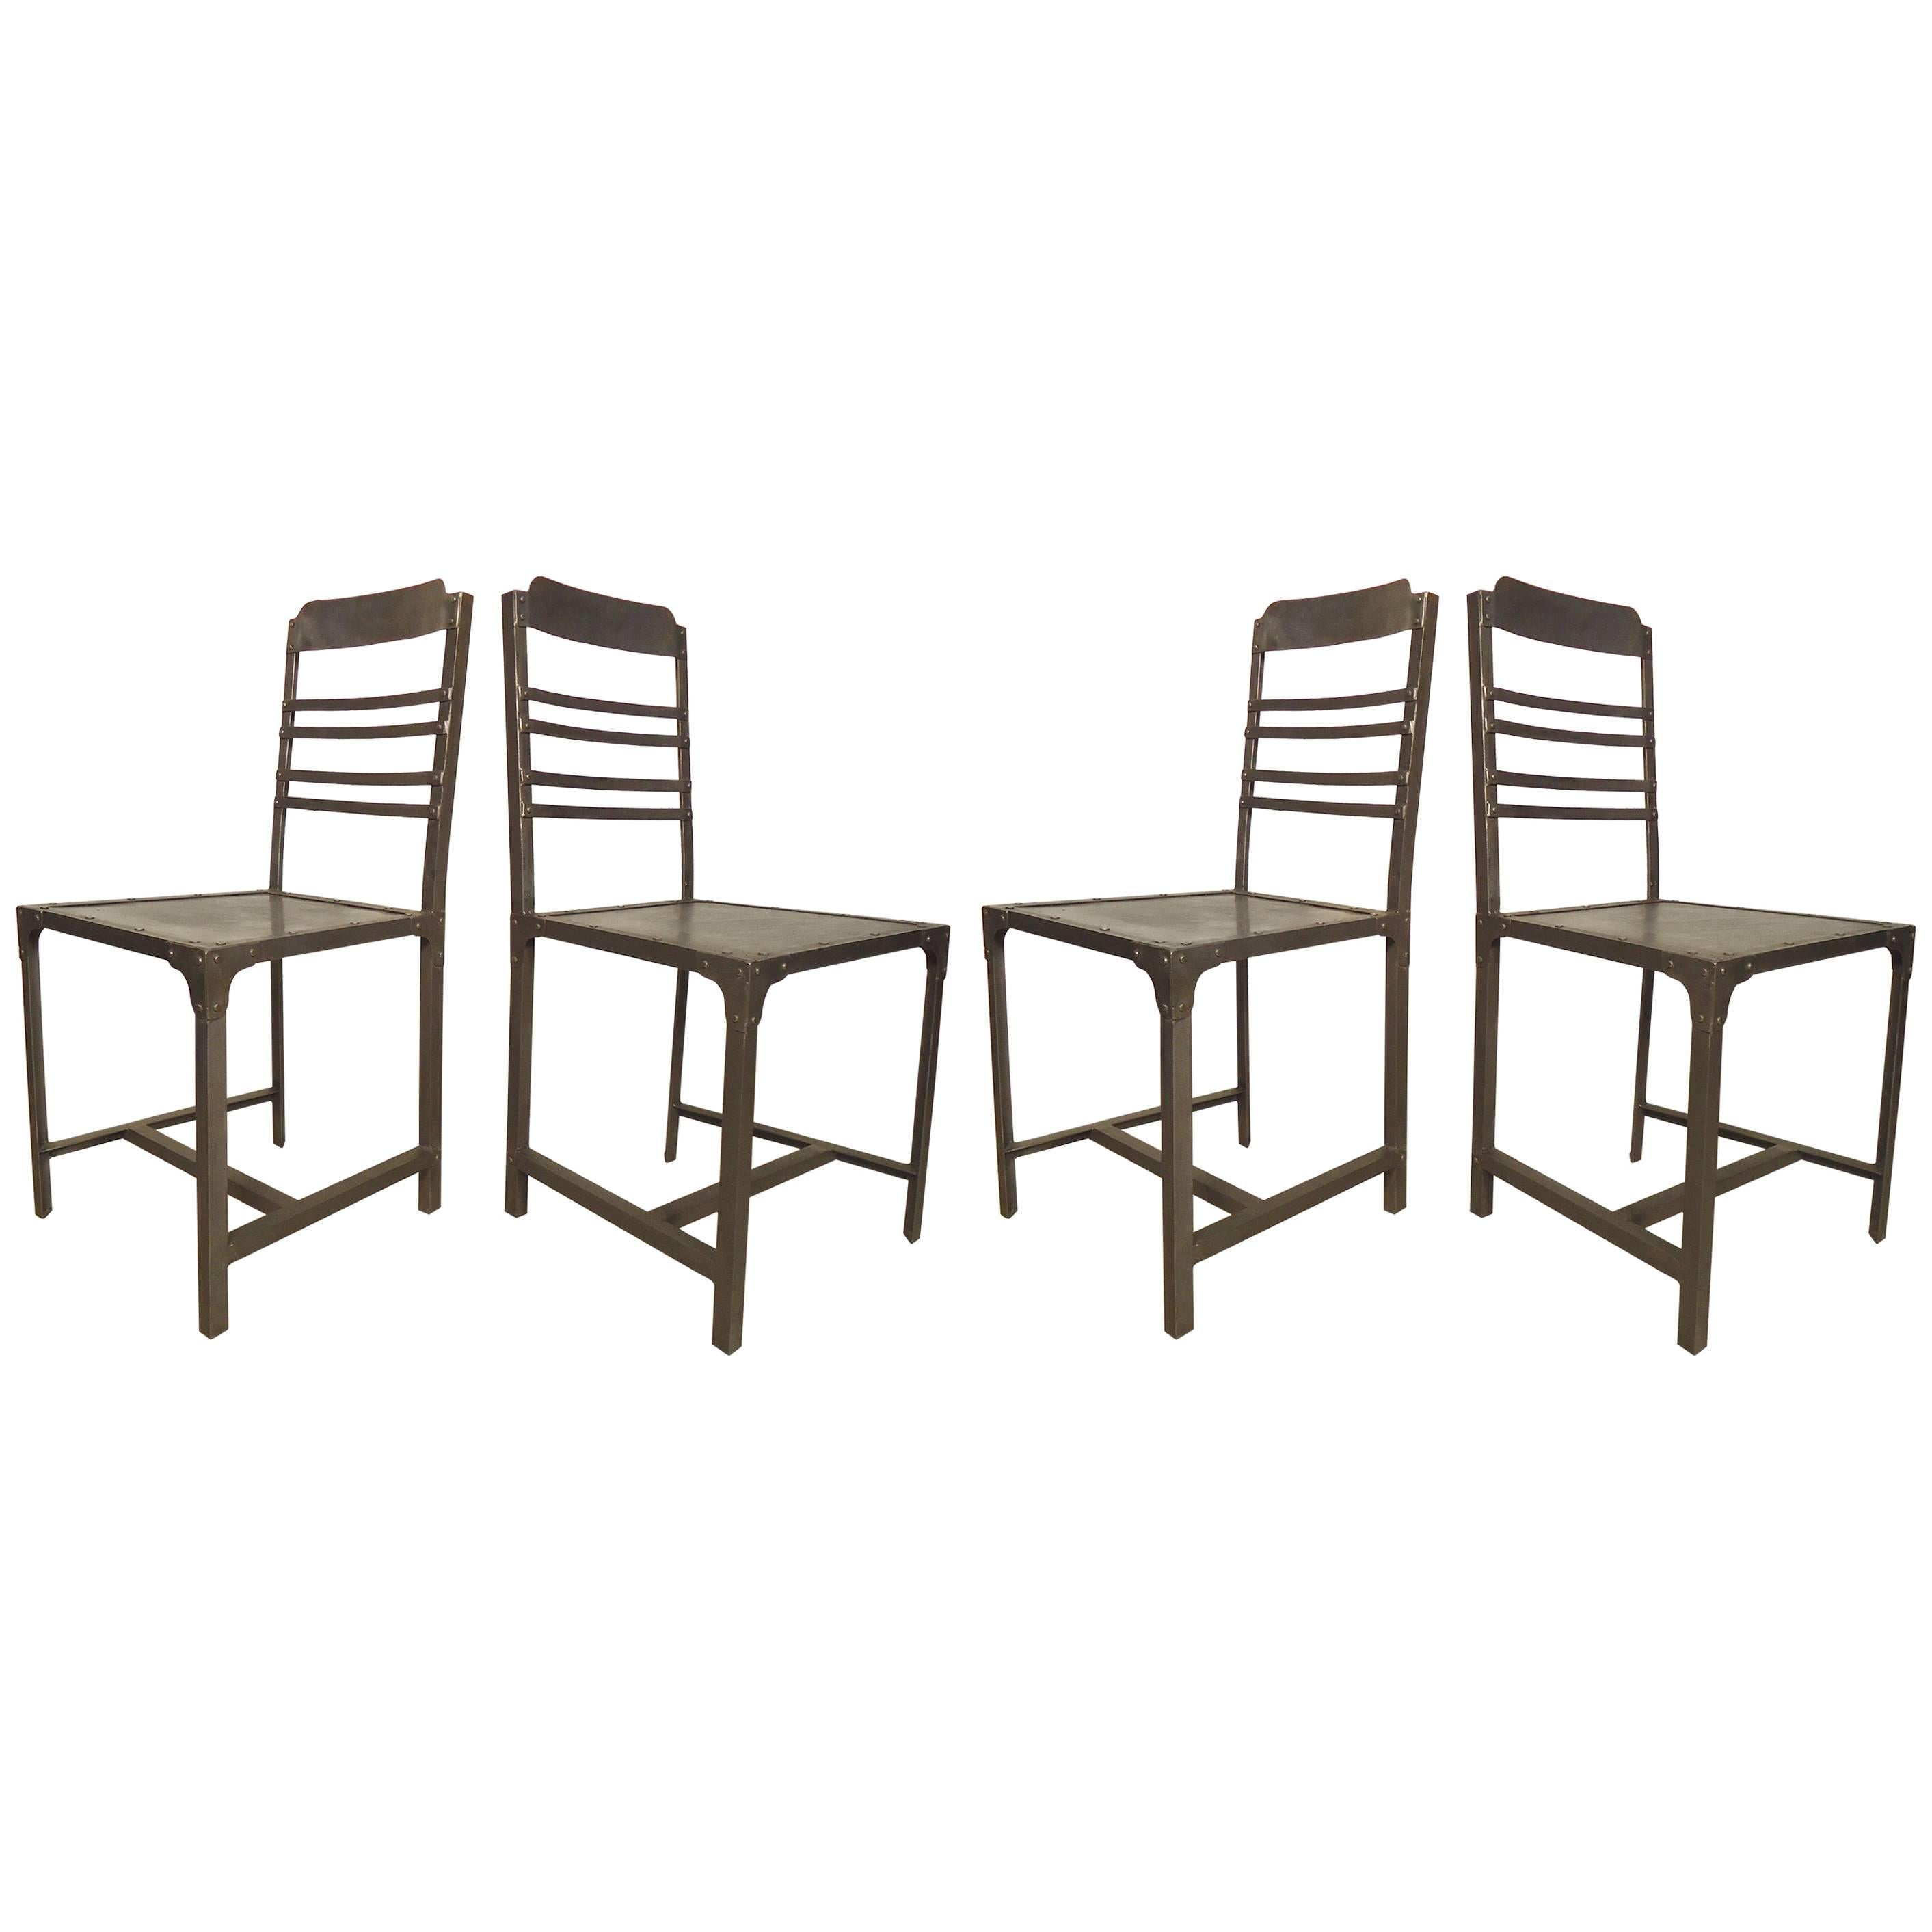 Set of Four Industrial Style Chairs For Sale